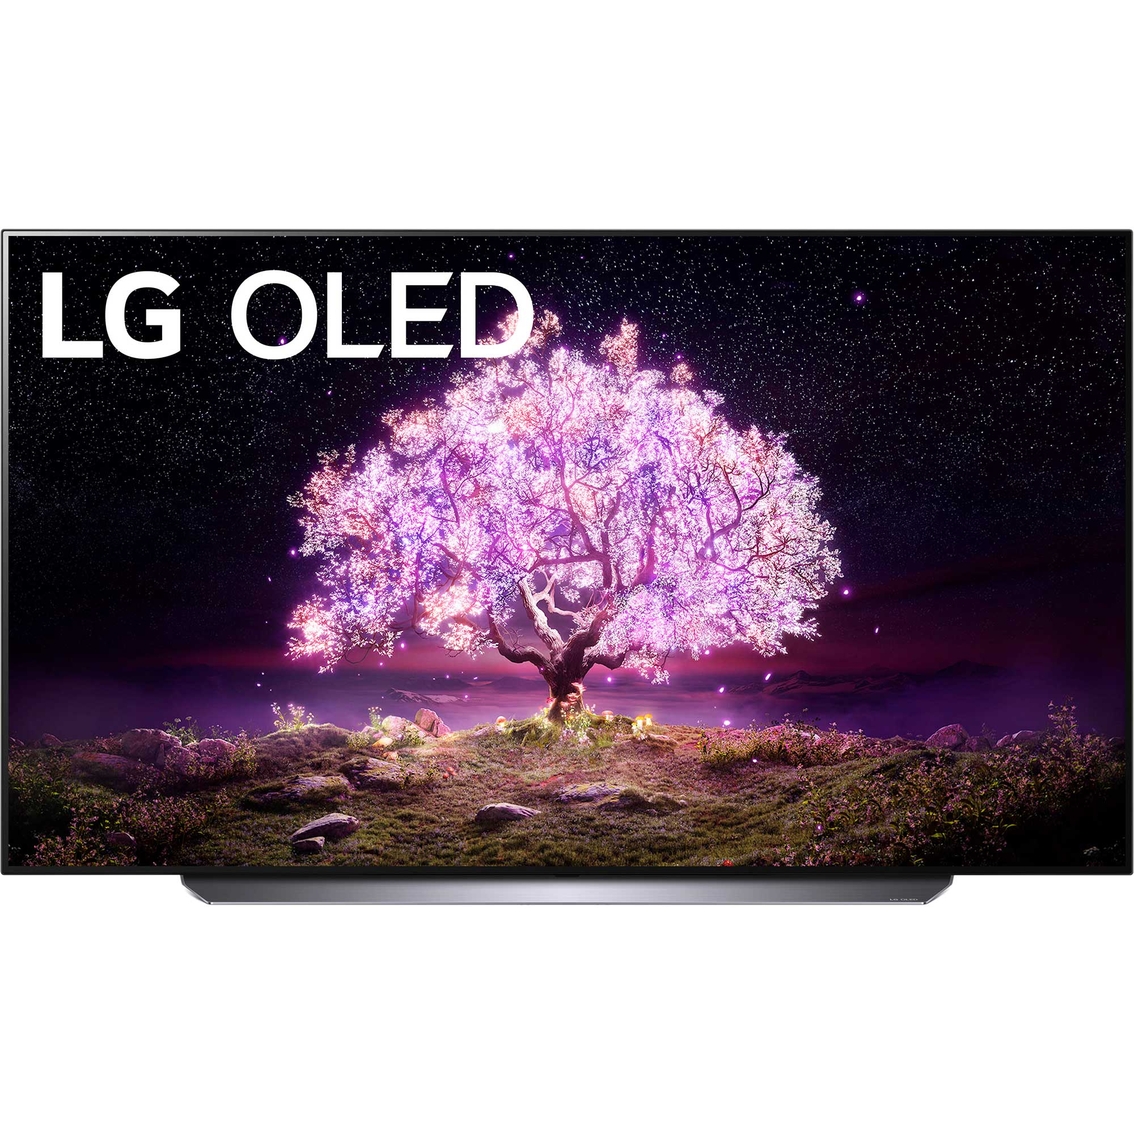 (back in stock) Active Military/Veterans: 65" LG C1PUB 4K HDR Smart OLED TV w/ AI ThinQ $1515.25 + Free Shipping $1515.24